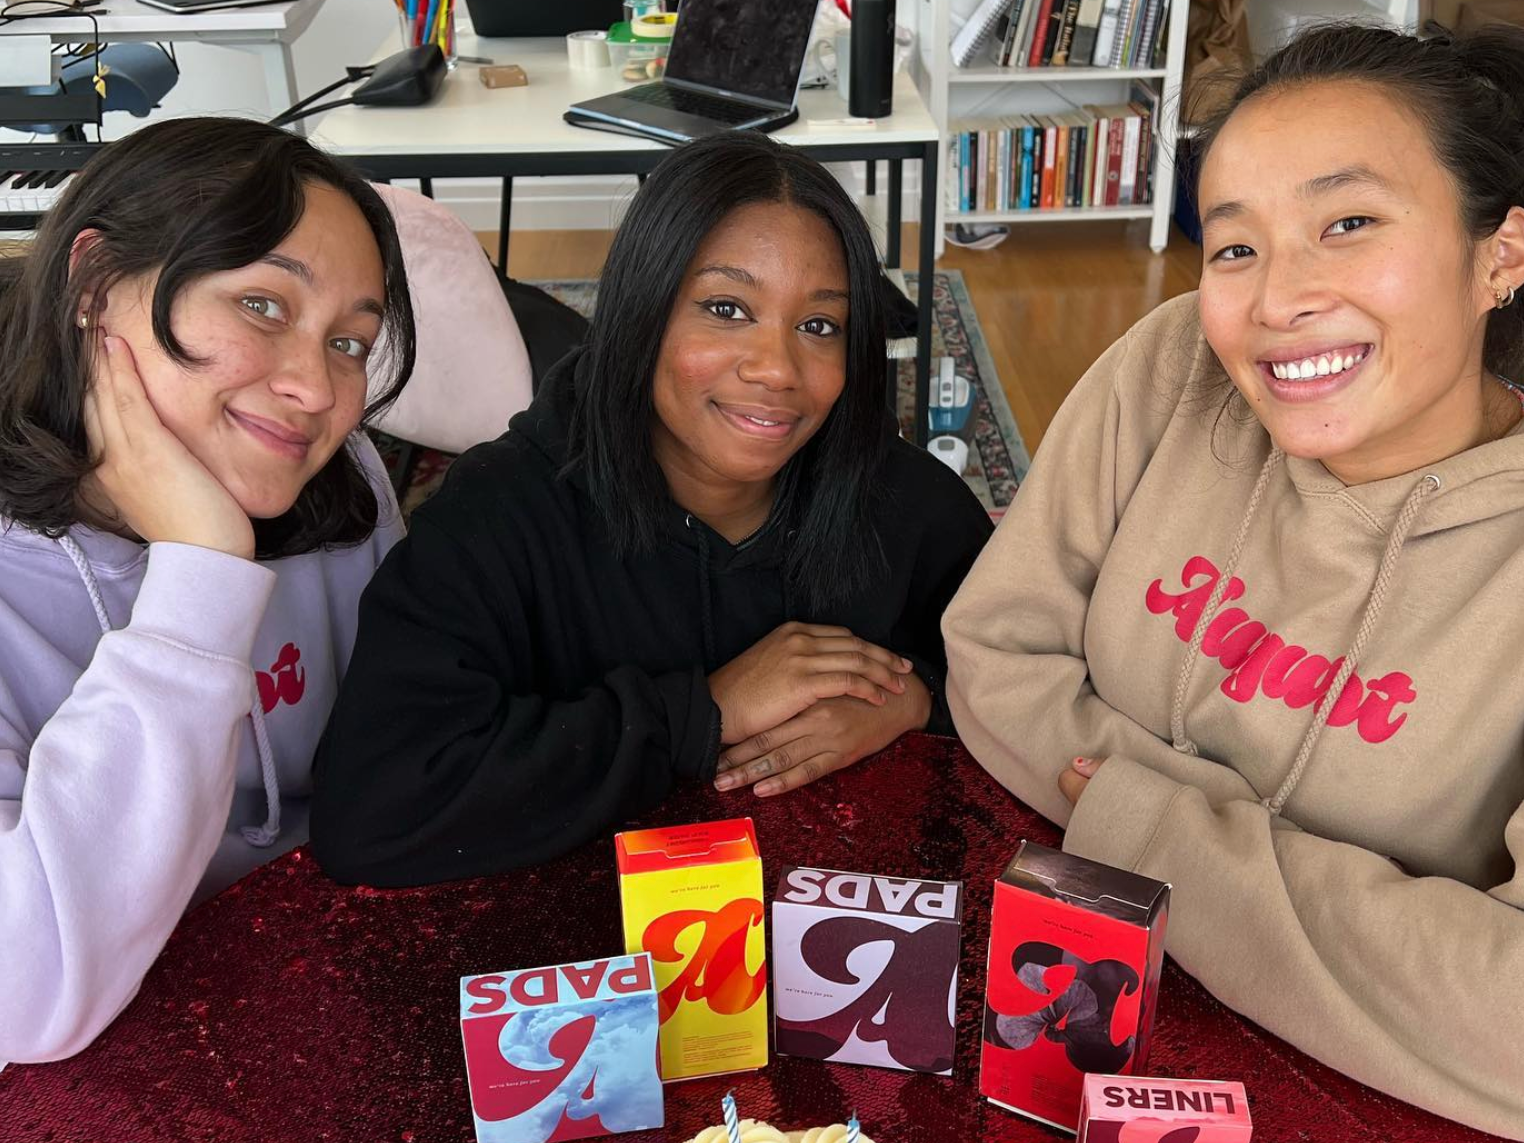 PERIOD BRAND, AUGUST, TO LAUNCH DEBUT PODCAST ‘THE PERIOD FEELS’ WITH PRODUCTION PARTNER, DCP ENTERTAINMENT